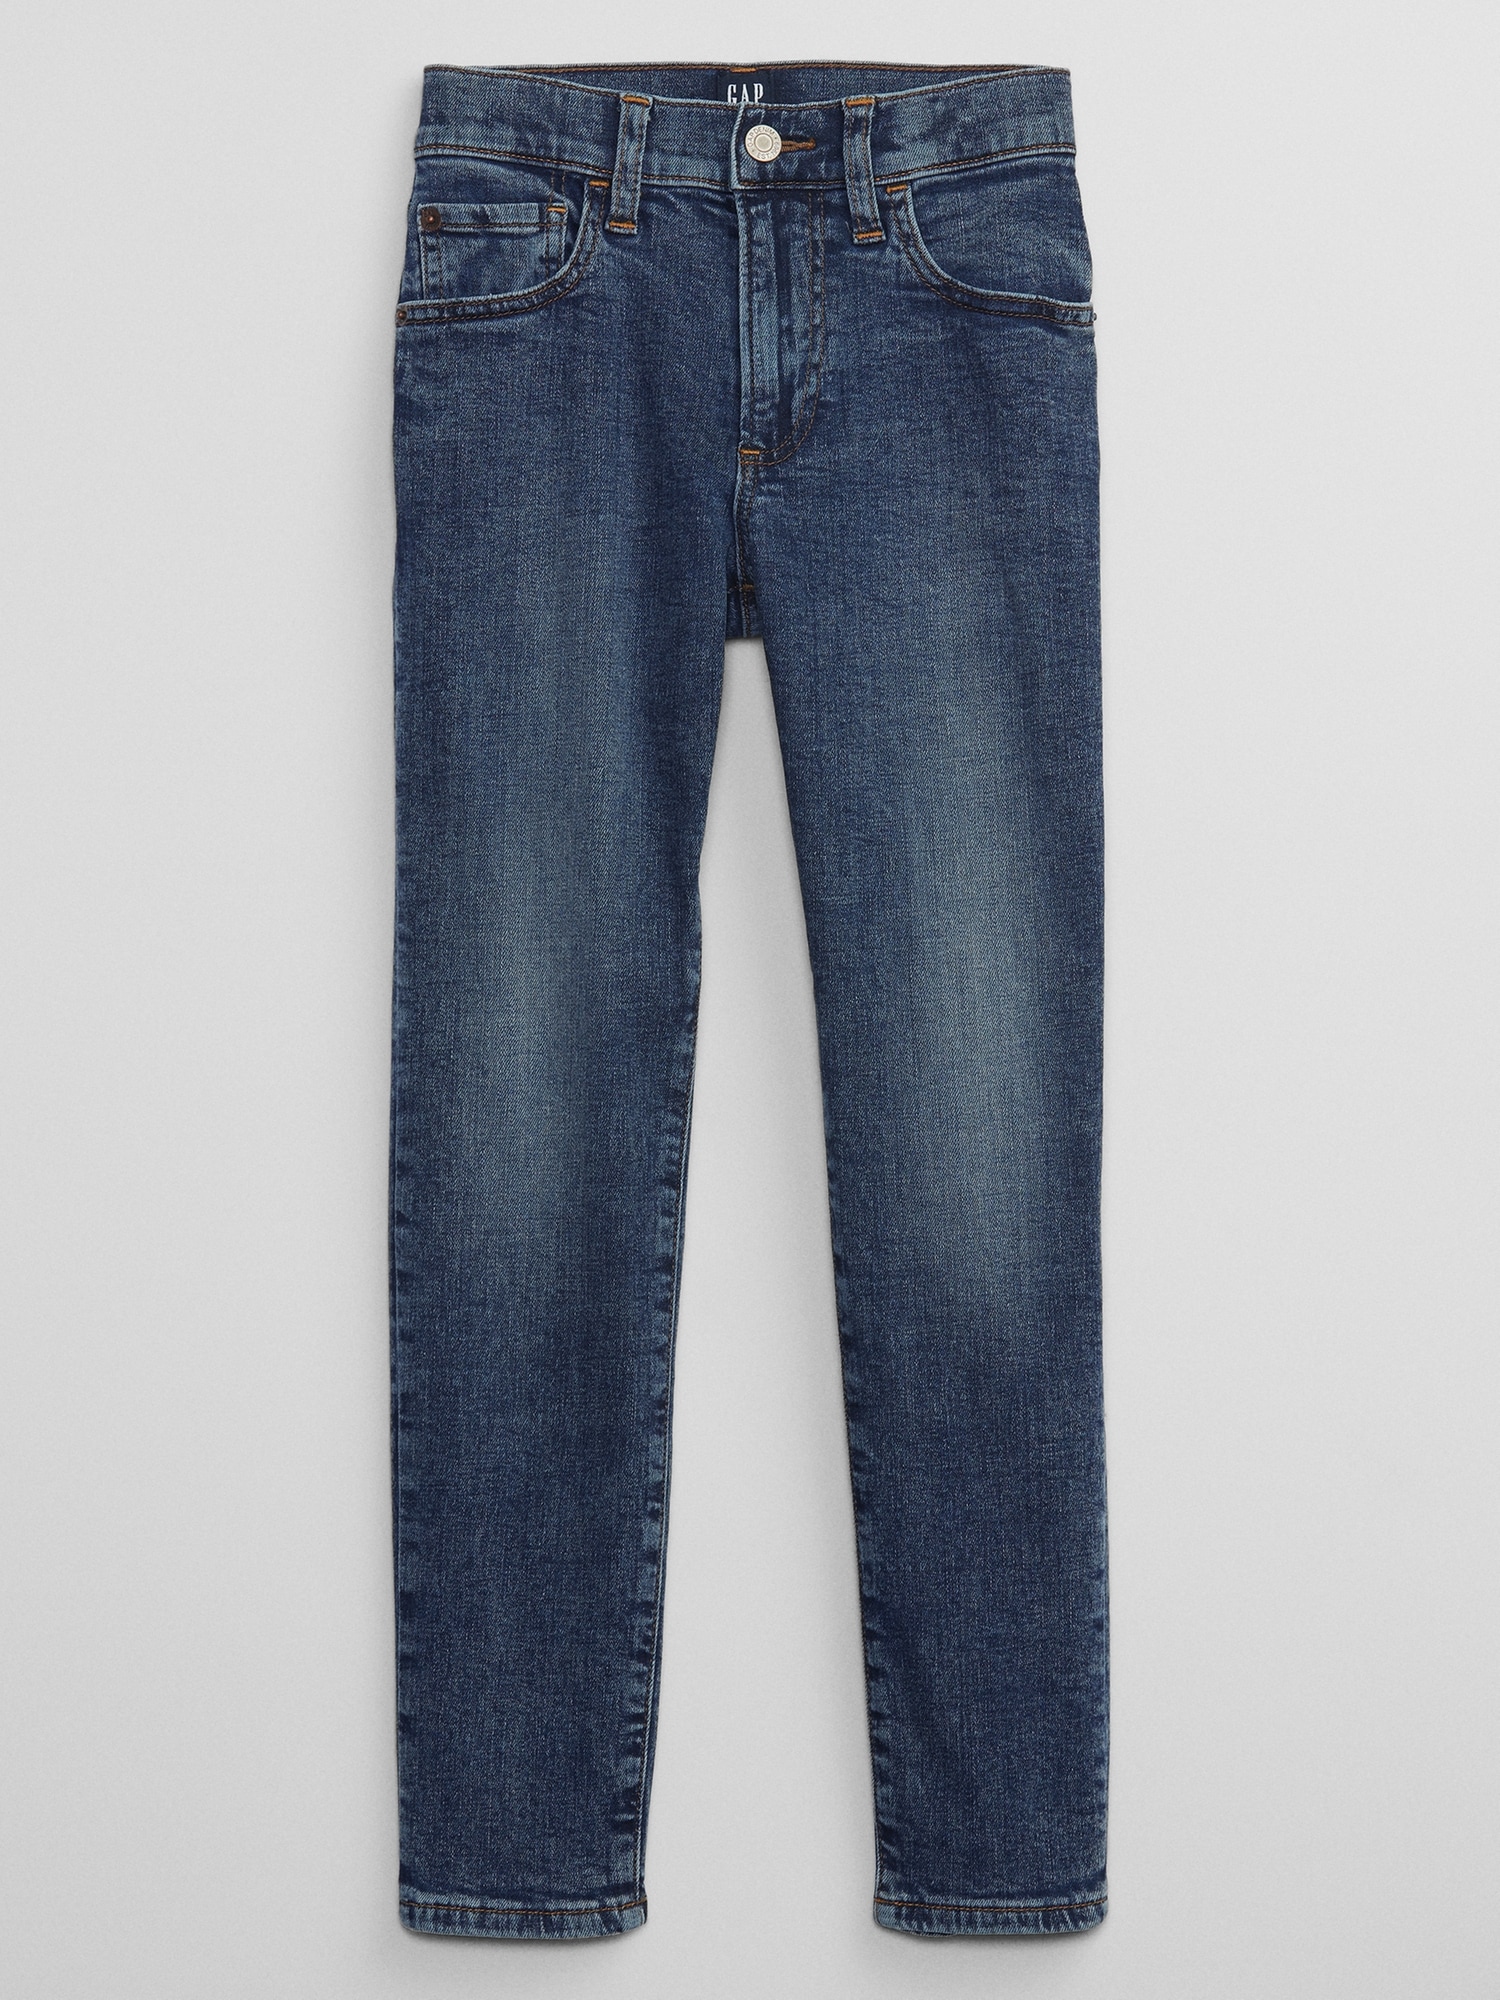 Kids Slim Taper Jeans with Washwell | Gap Factory